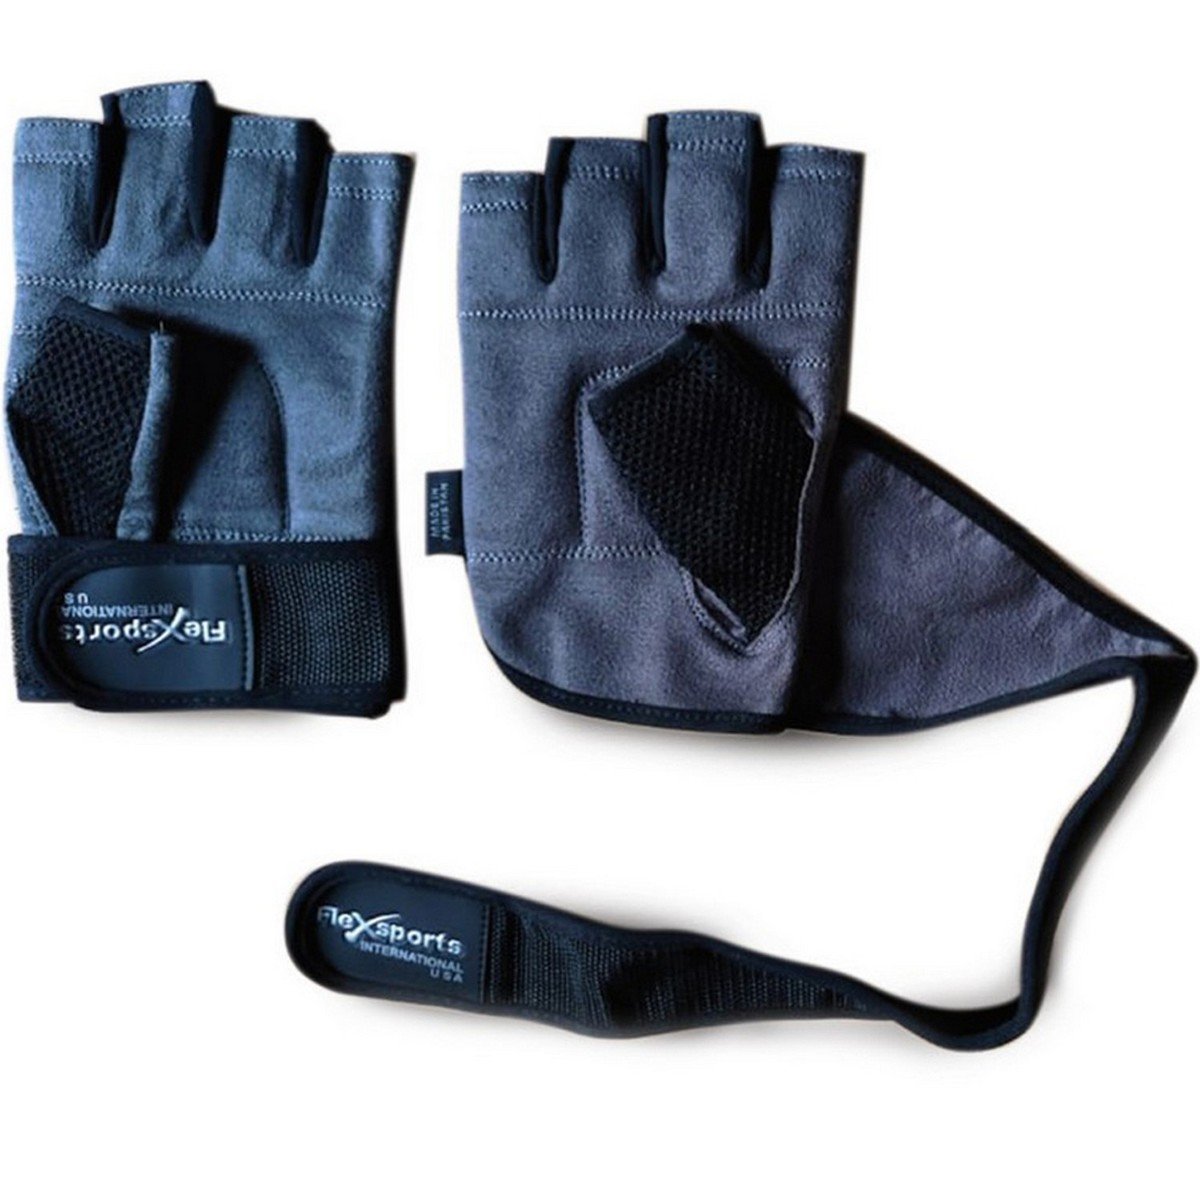 Cardio Fitness Gym Gloves With Wrist Support Assorted Per Set